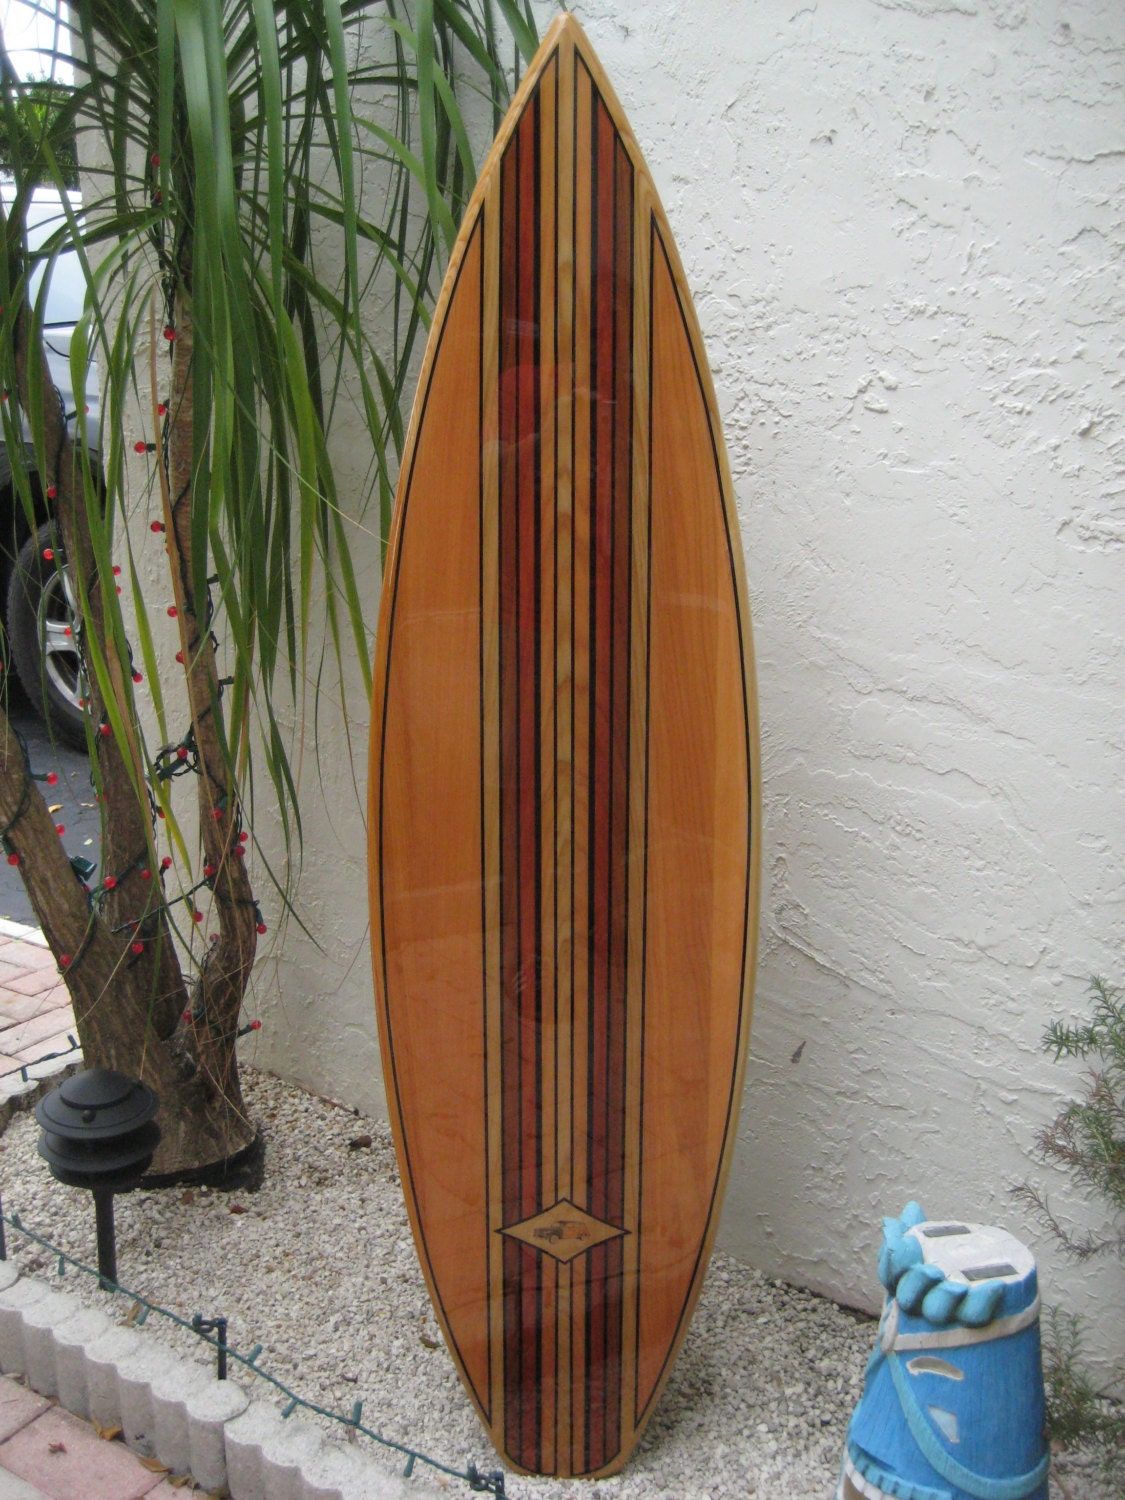 Decorative Wooden Surfboard Wall Art For A Hotel Restaurant Throughout Newest Surfing Wall Art (View 3 of 20)